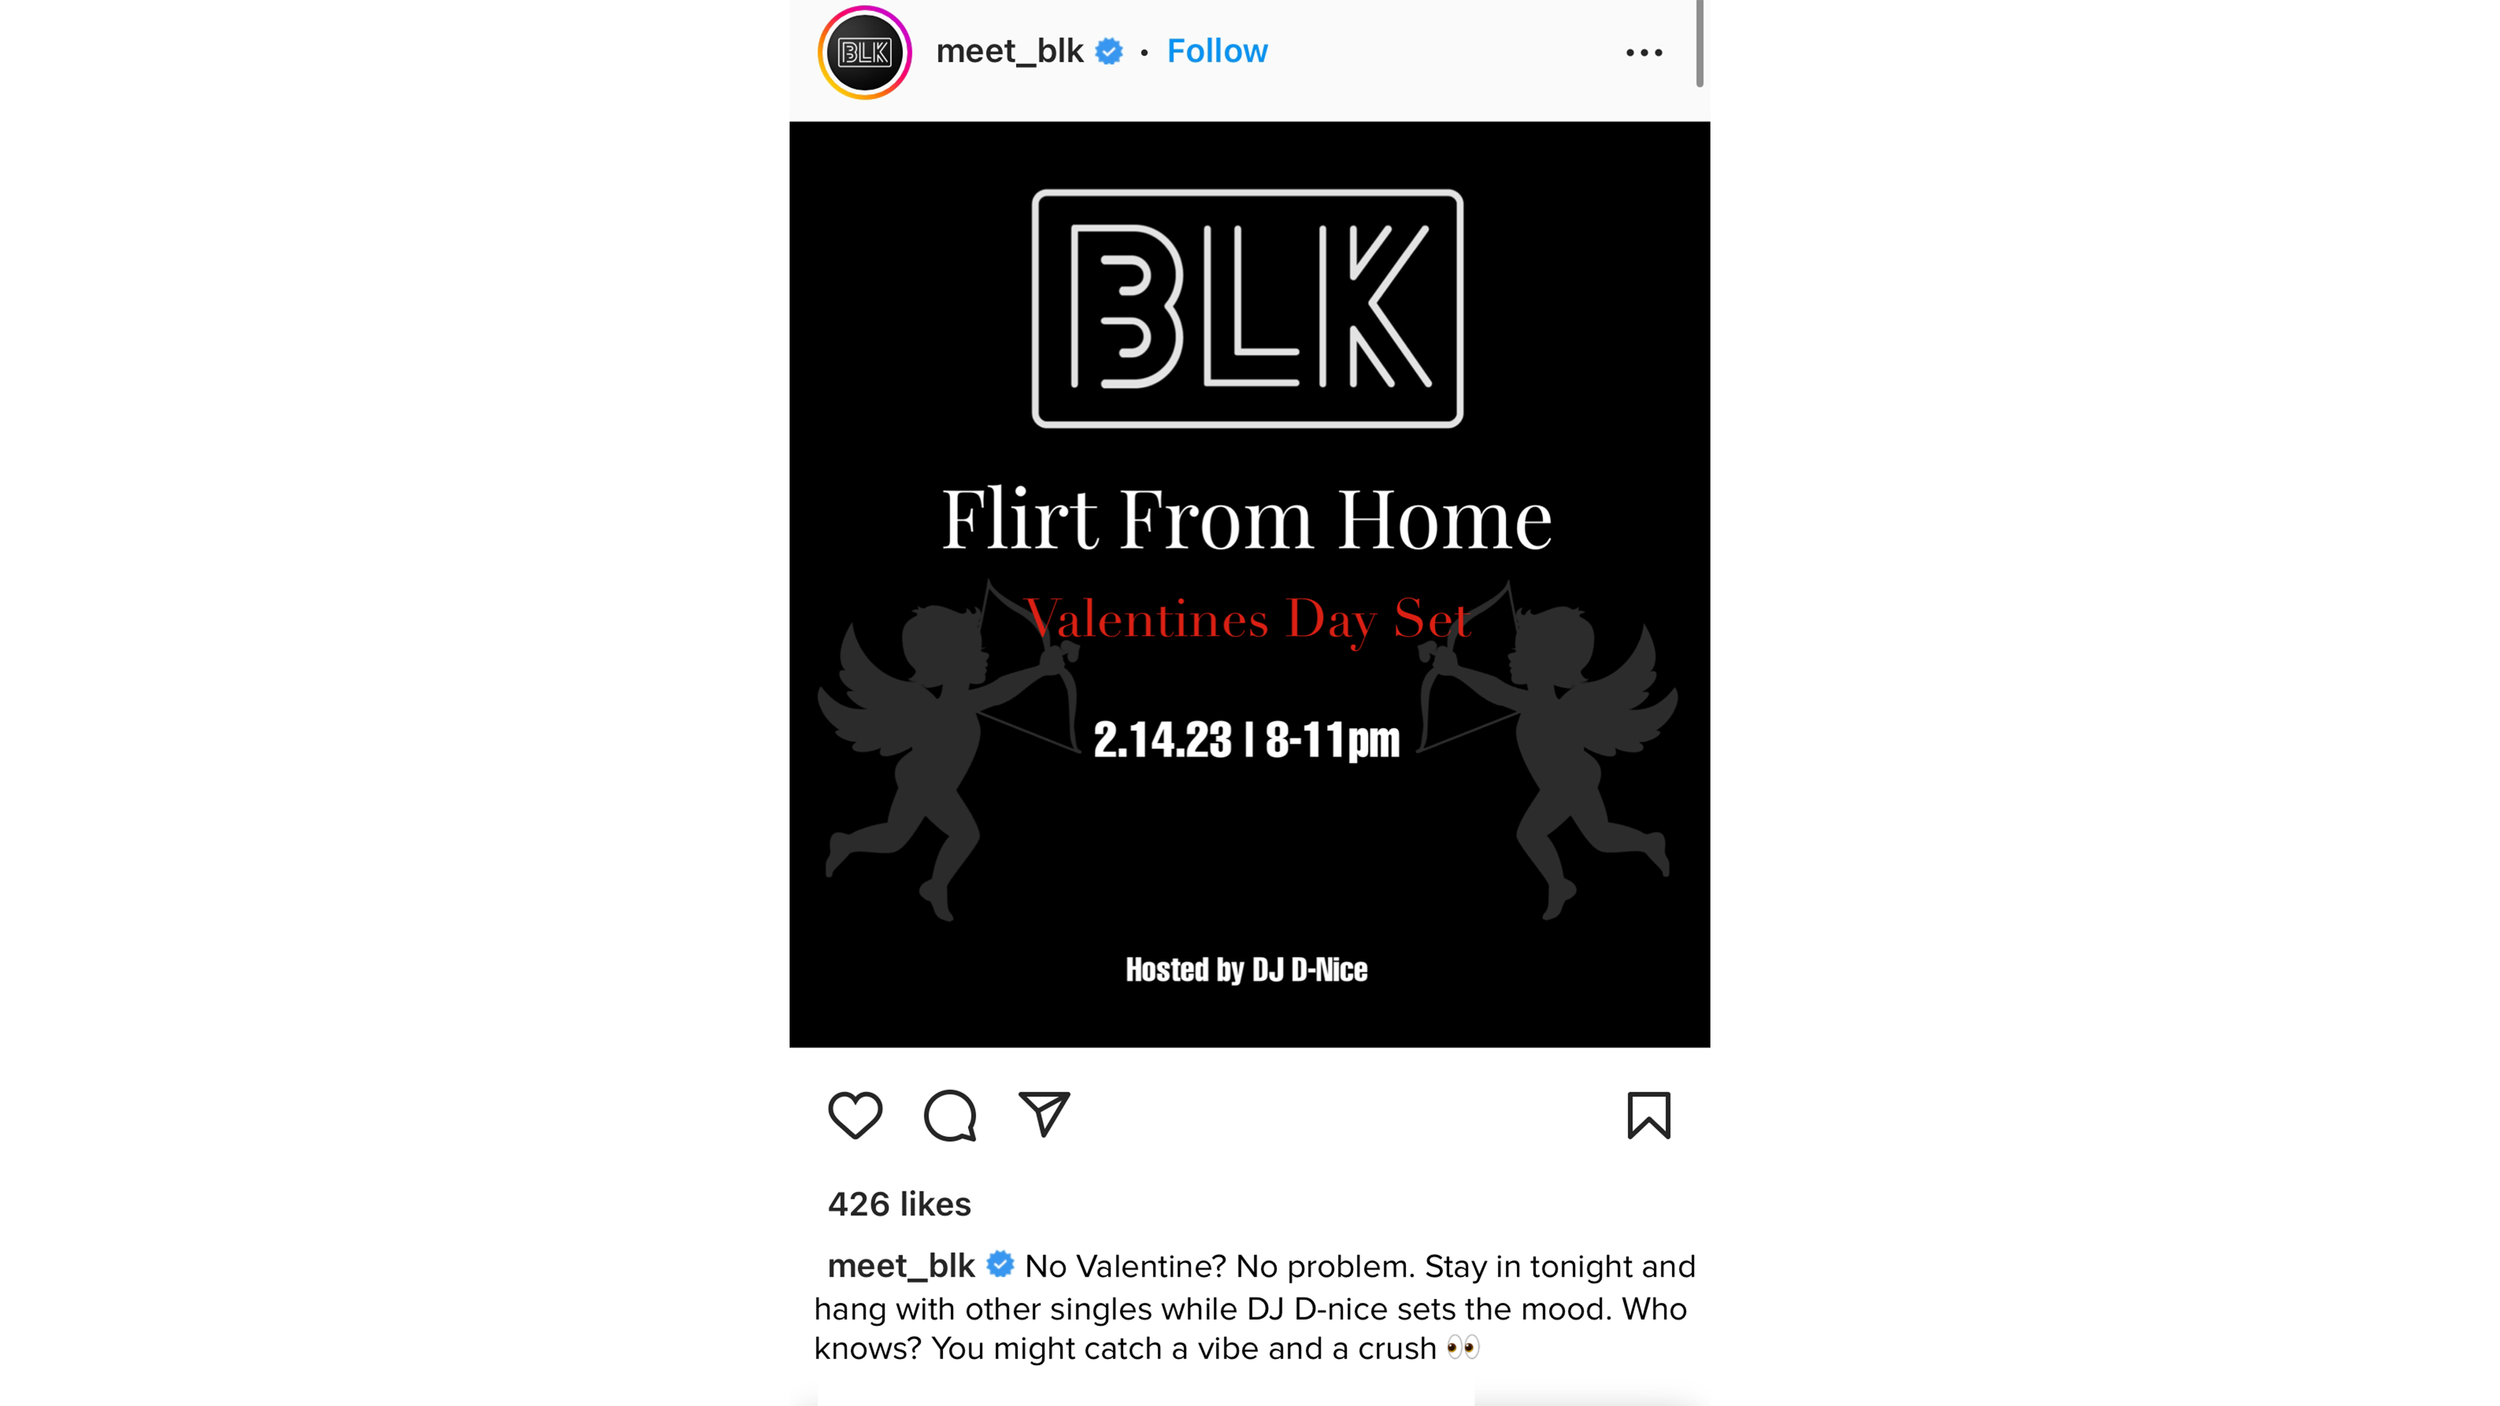  The Flirt From Home event allows singles to have a virtual house party experience. BLK will host a livestream of DJ D-Nice from the app. Participants will be able to see profile photos of everyone on the livestream. There will also be a live chat wh